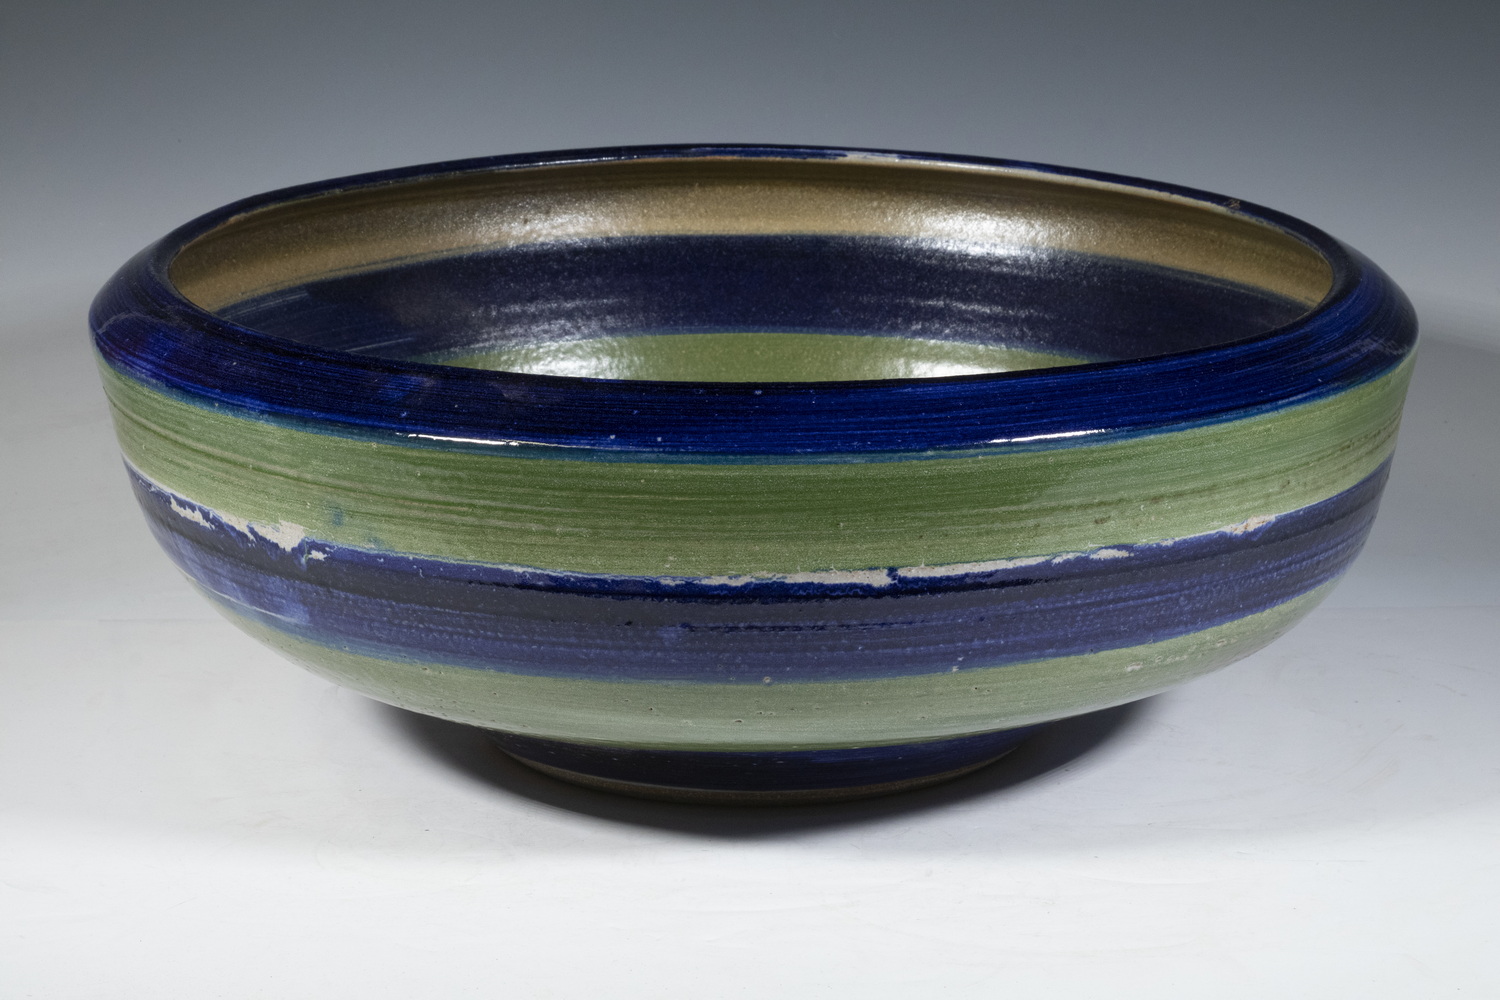 ART POTTERY BOWL BY DONALD SUTHERLAND